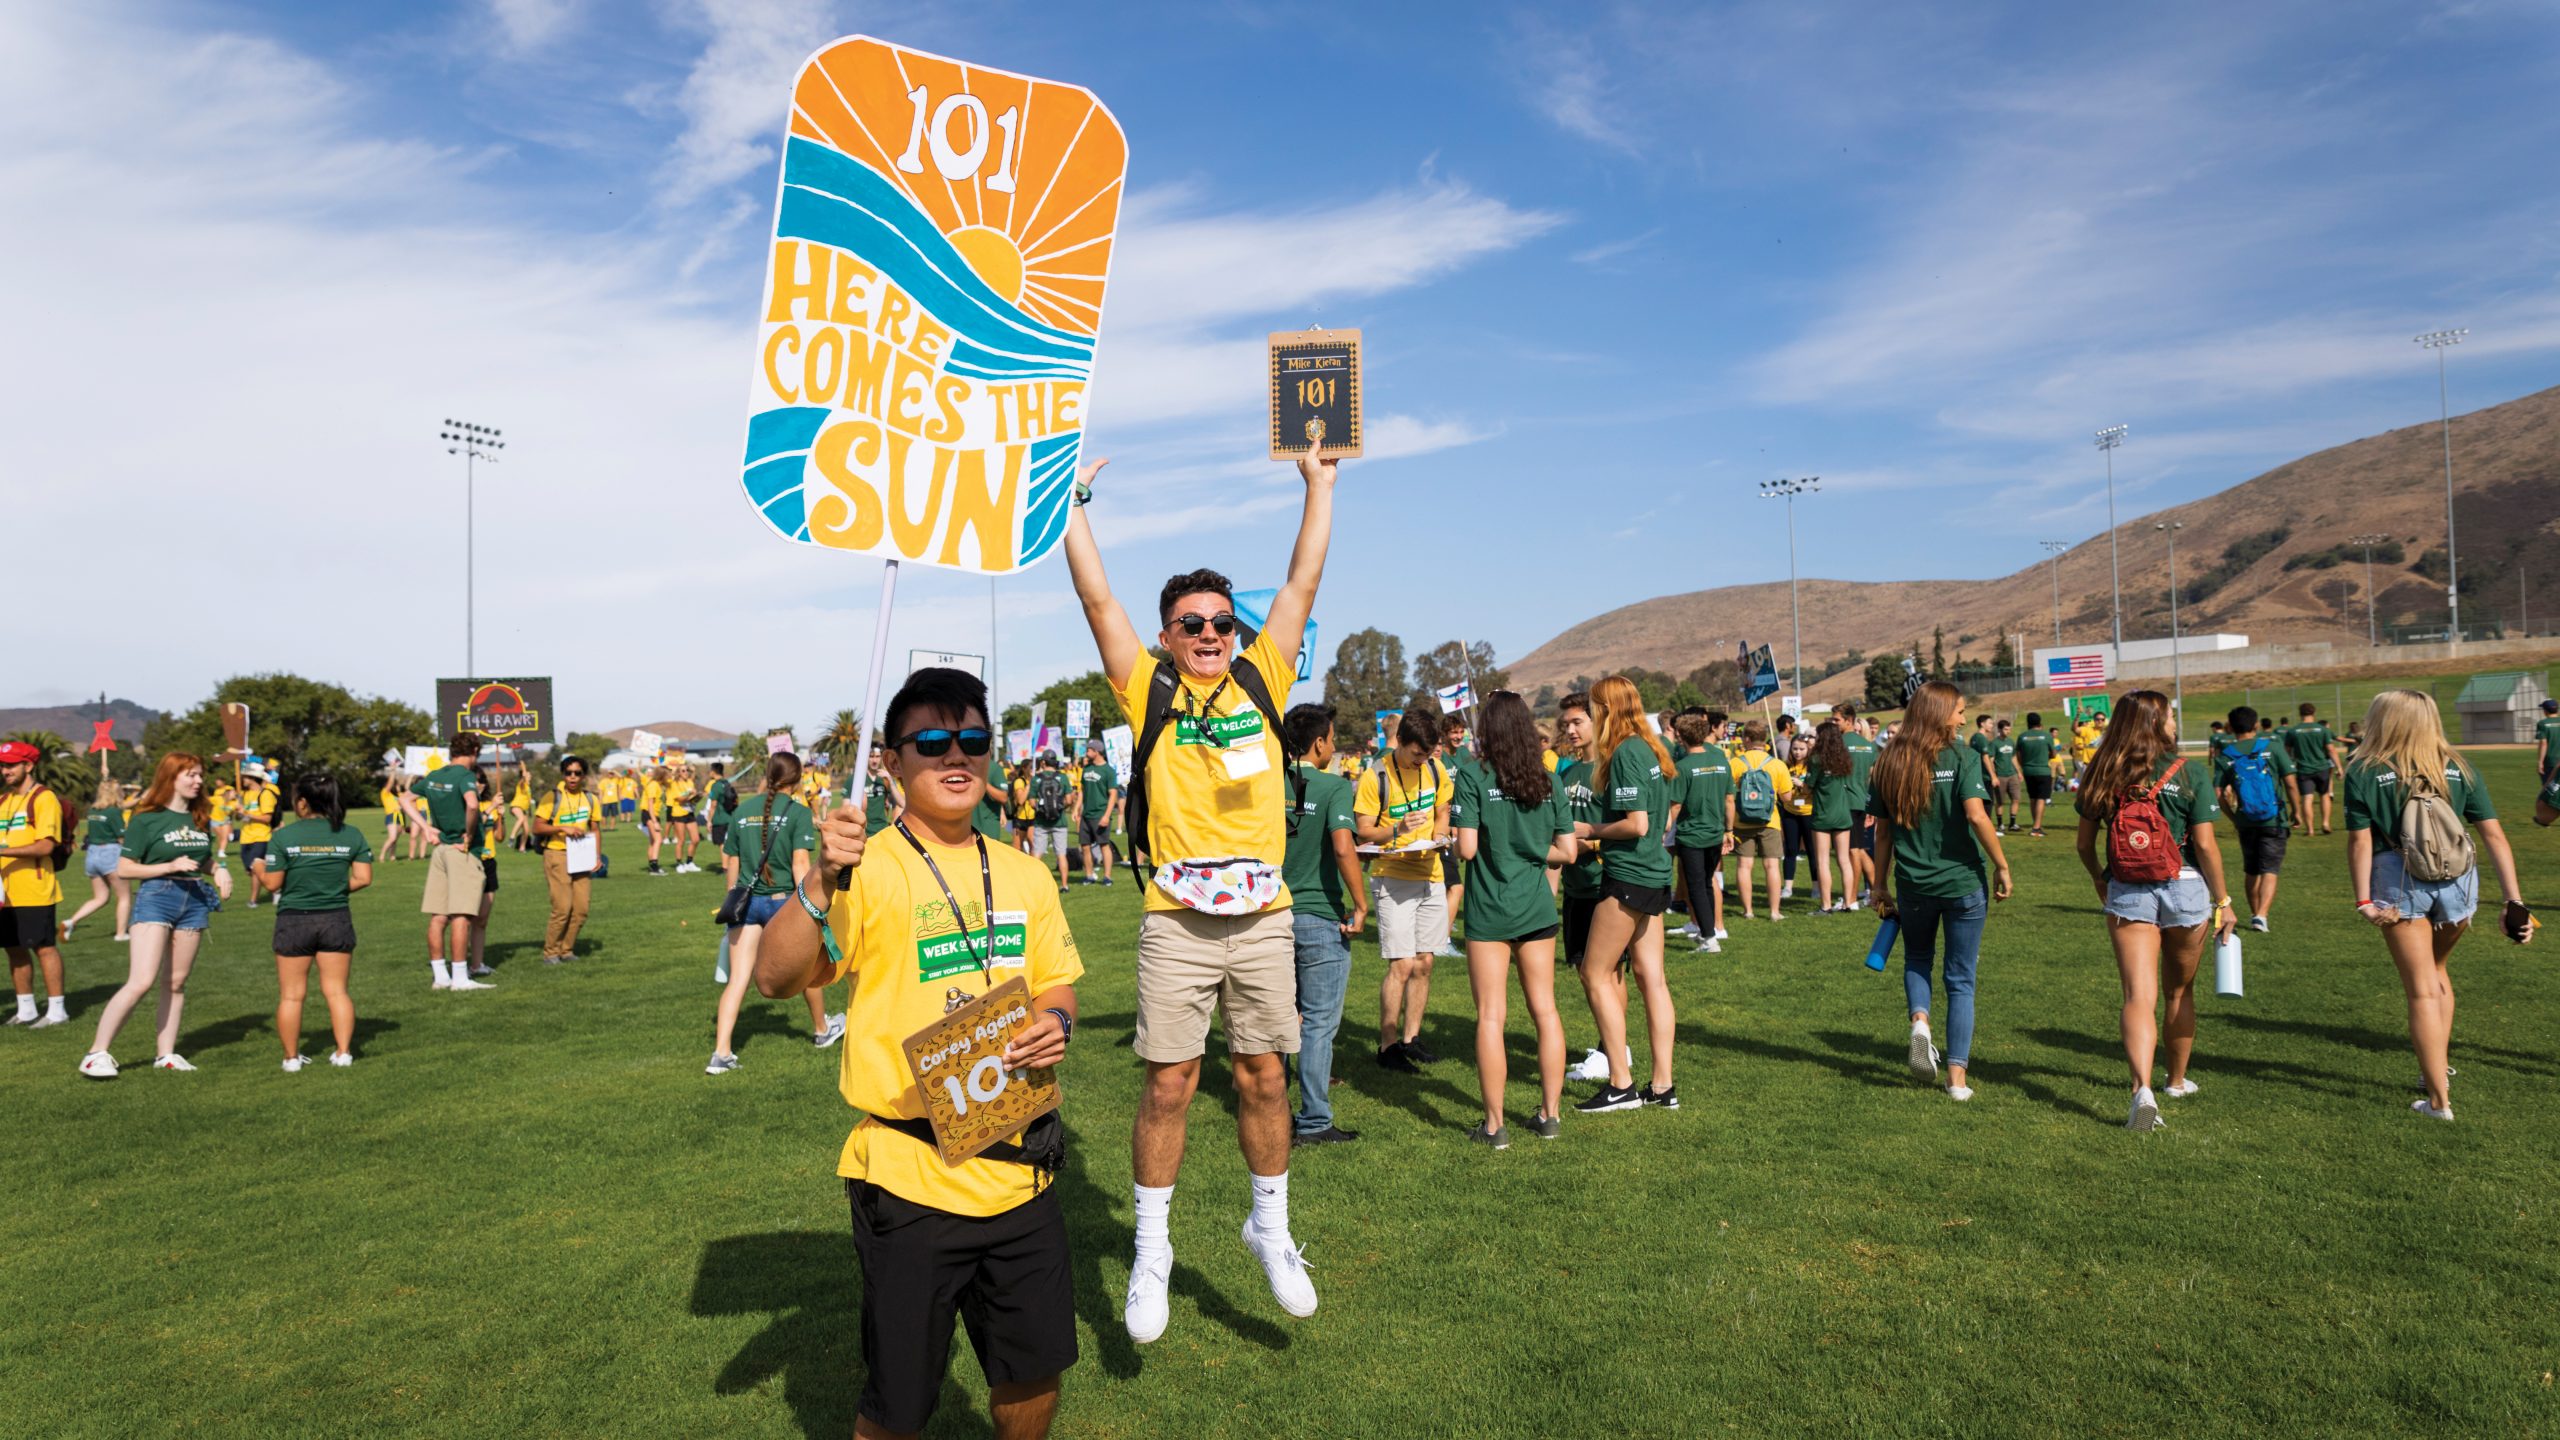 Two young men, wearing sunglasses and yellow Week of Welcome t-shirts and gesturing excitedly with signs, stand on a grassy field in front of dozens of other students.